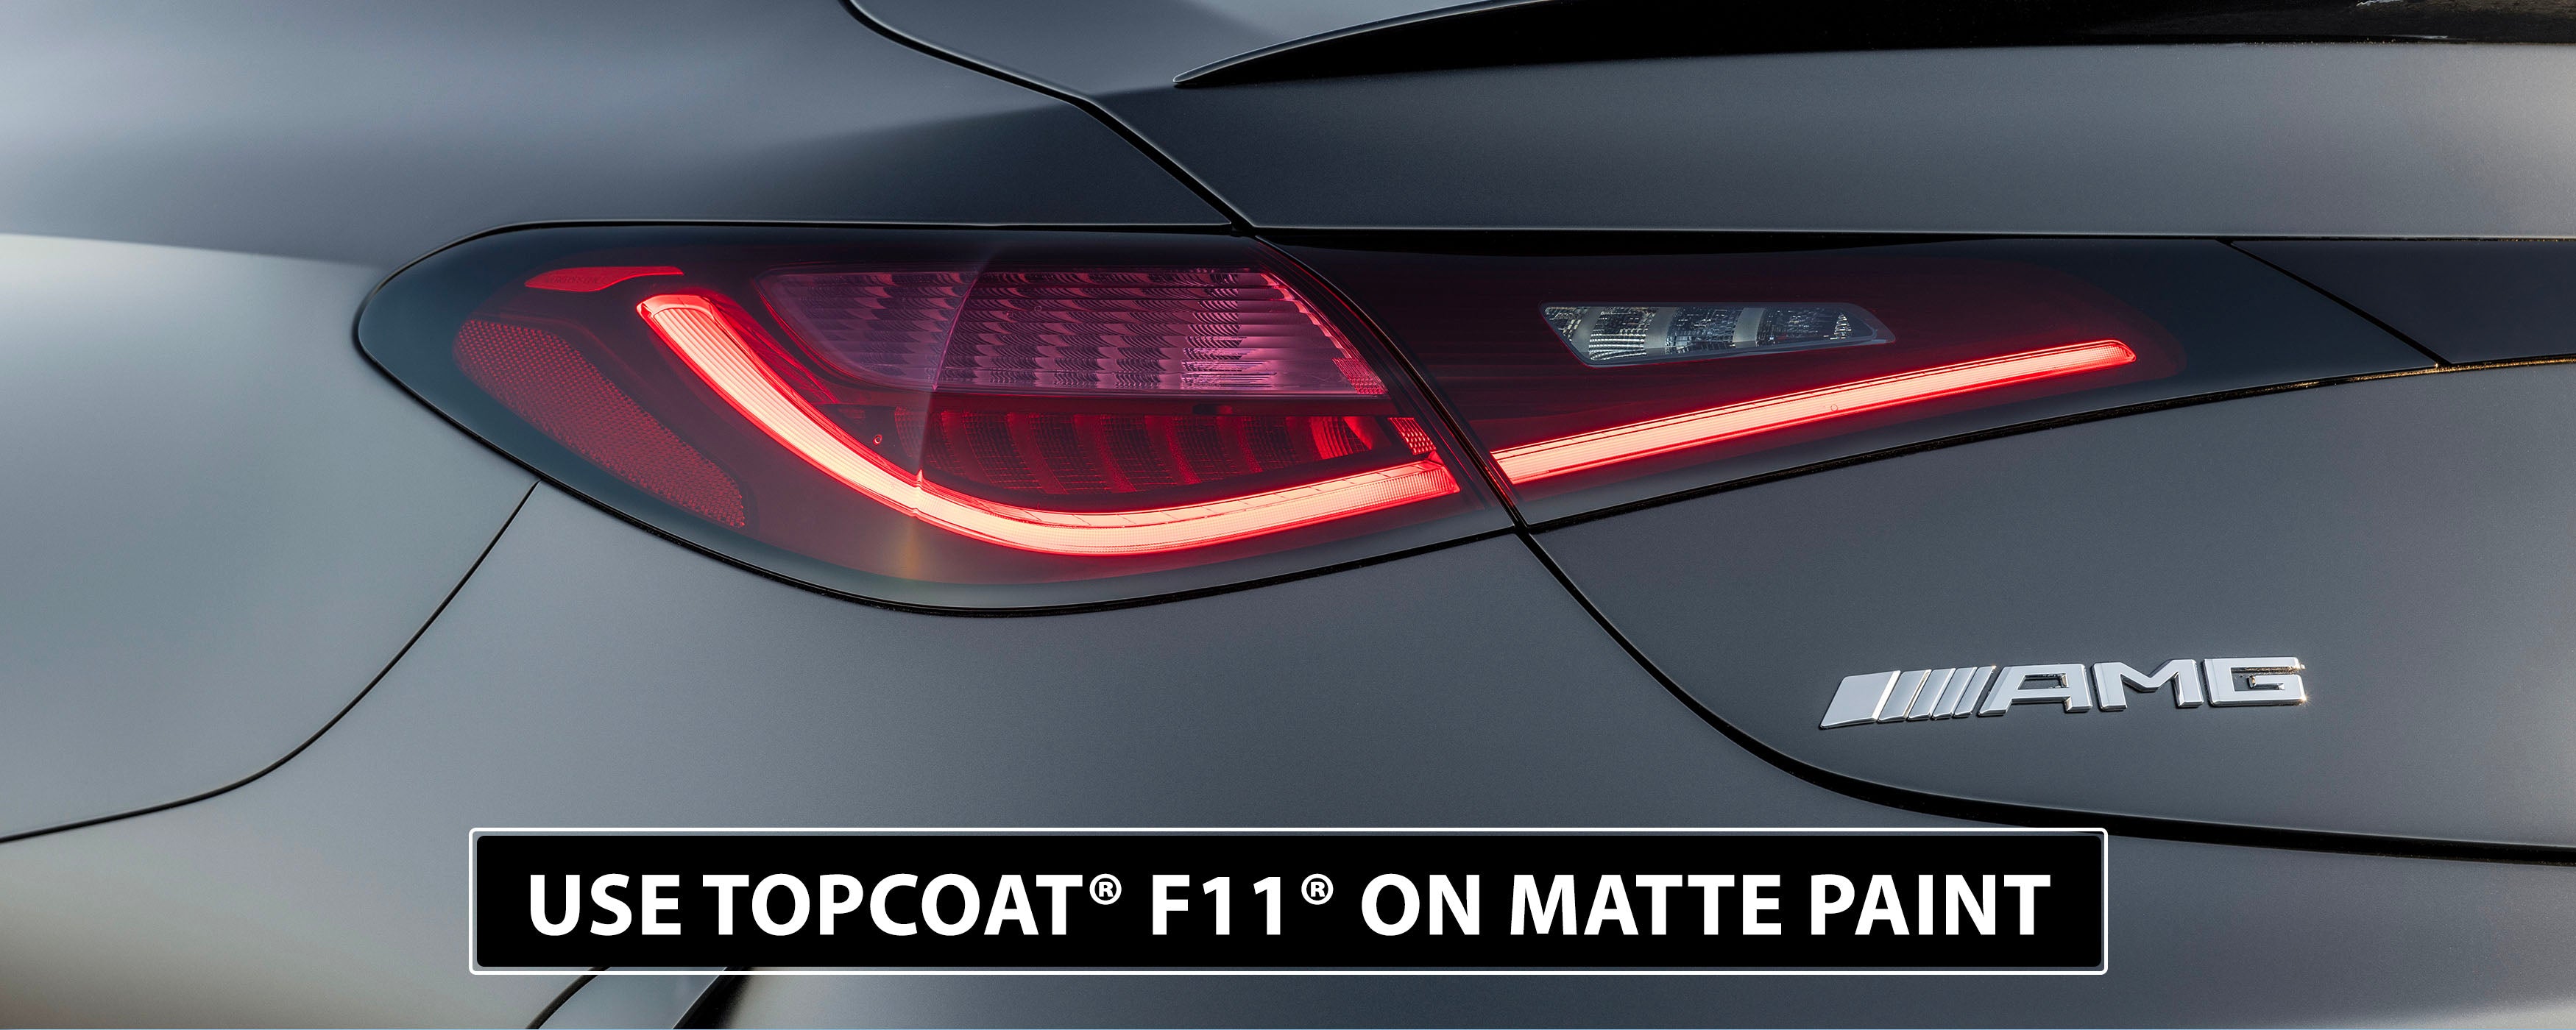 Did You Know TopCoat® F11® Can Be Used on Matte Paint?